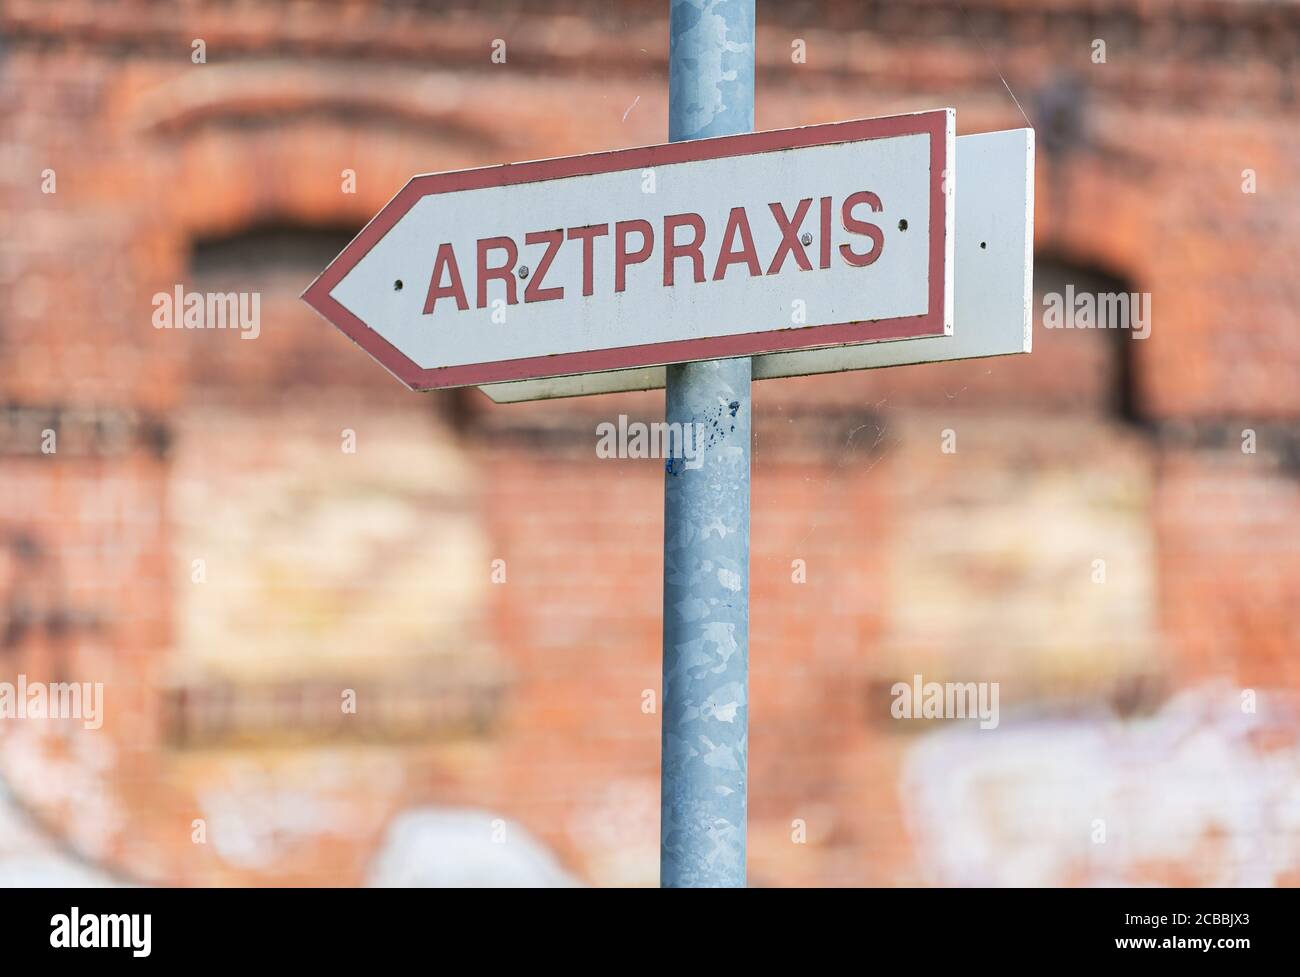 Wustermark, Germany. 10th Aug, 2020. There's a sign 'Arztpraxis' by the road. Credit: Soeren Stache/dpa-Zentralbild/ZB/dpa/Alamy Live News Stock Photo